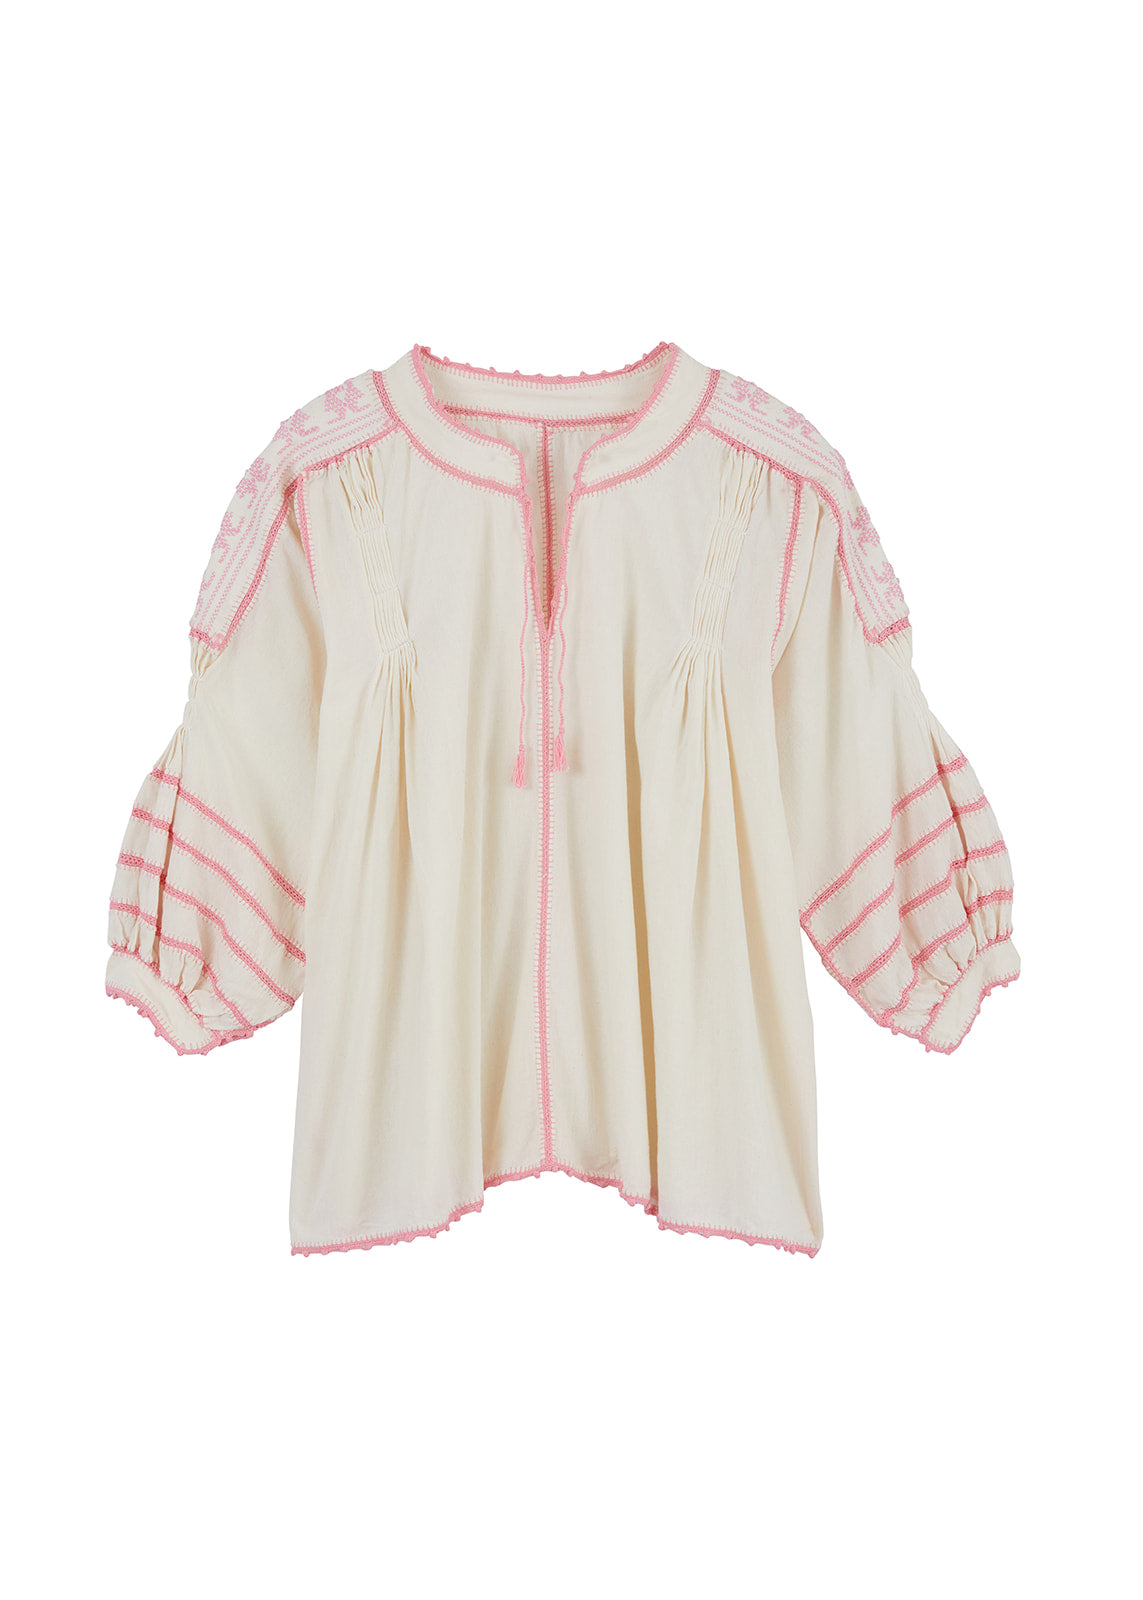 Amorcita Mexican Top - Ivory, Pink by Larkin Lane